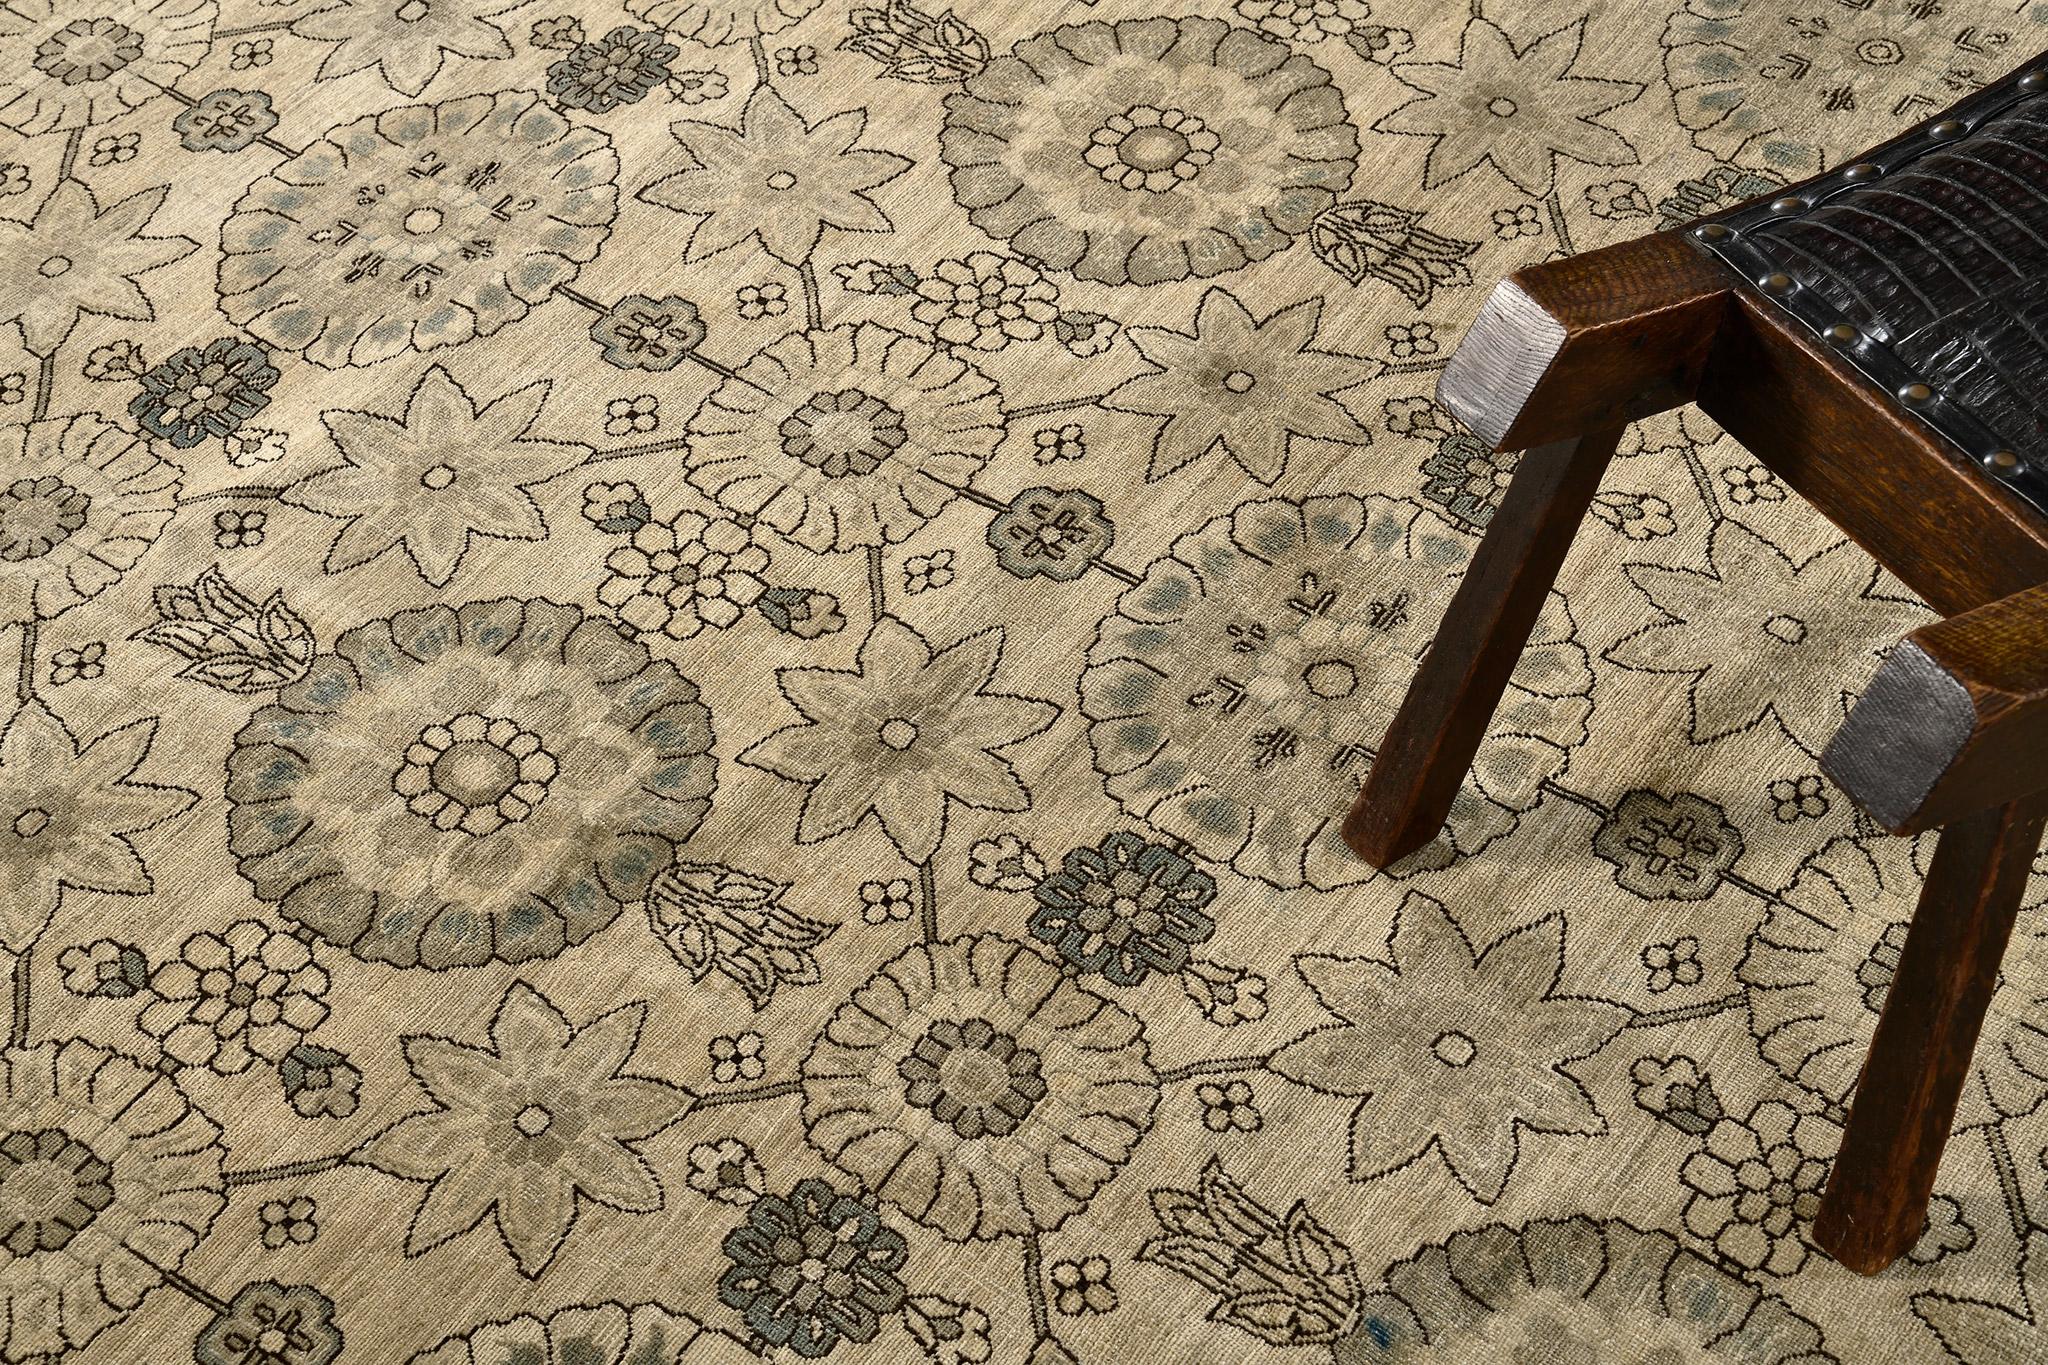 A saturated gray round pattern revival of Tabriz rug that is elegantly styled intermittently. Cypress trees are perfectly sewn with the side of coffee brown florid borders. The type of rug that perfectly fits in both traditional and modern home